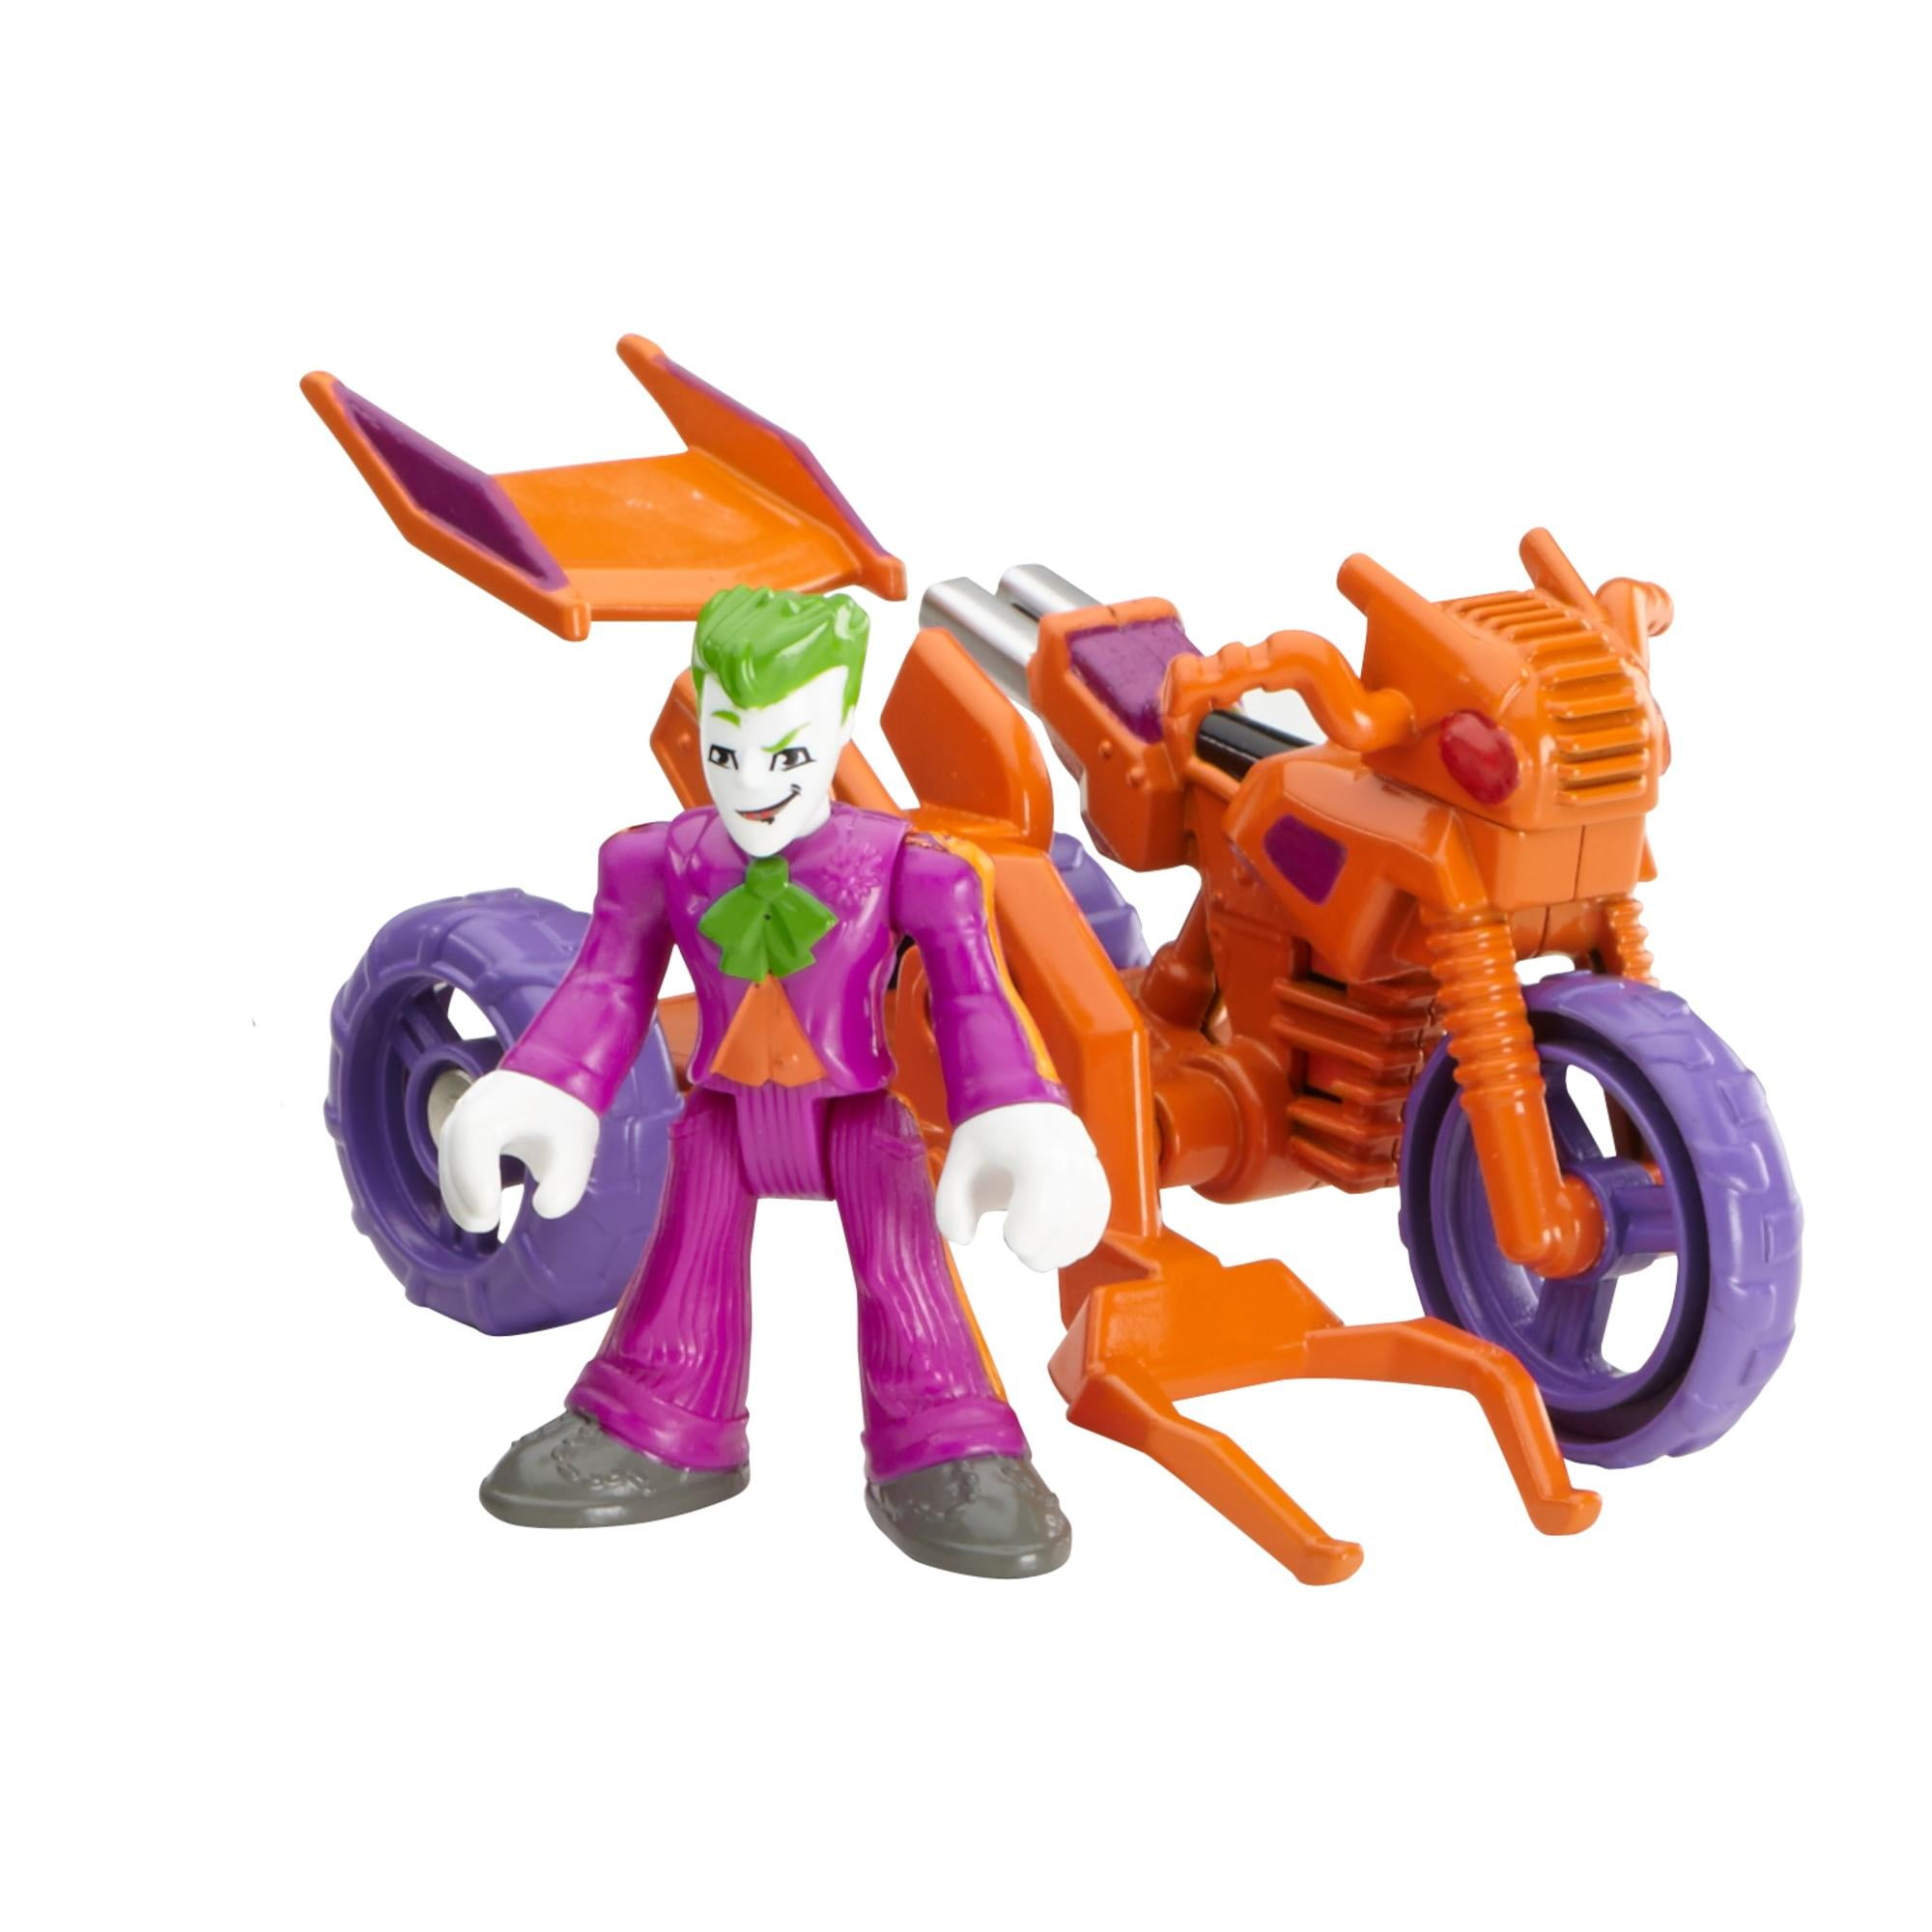 Fisher Price Imaginext Joker Cycle motorcycle hammer lot set villain toy parts 